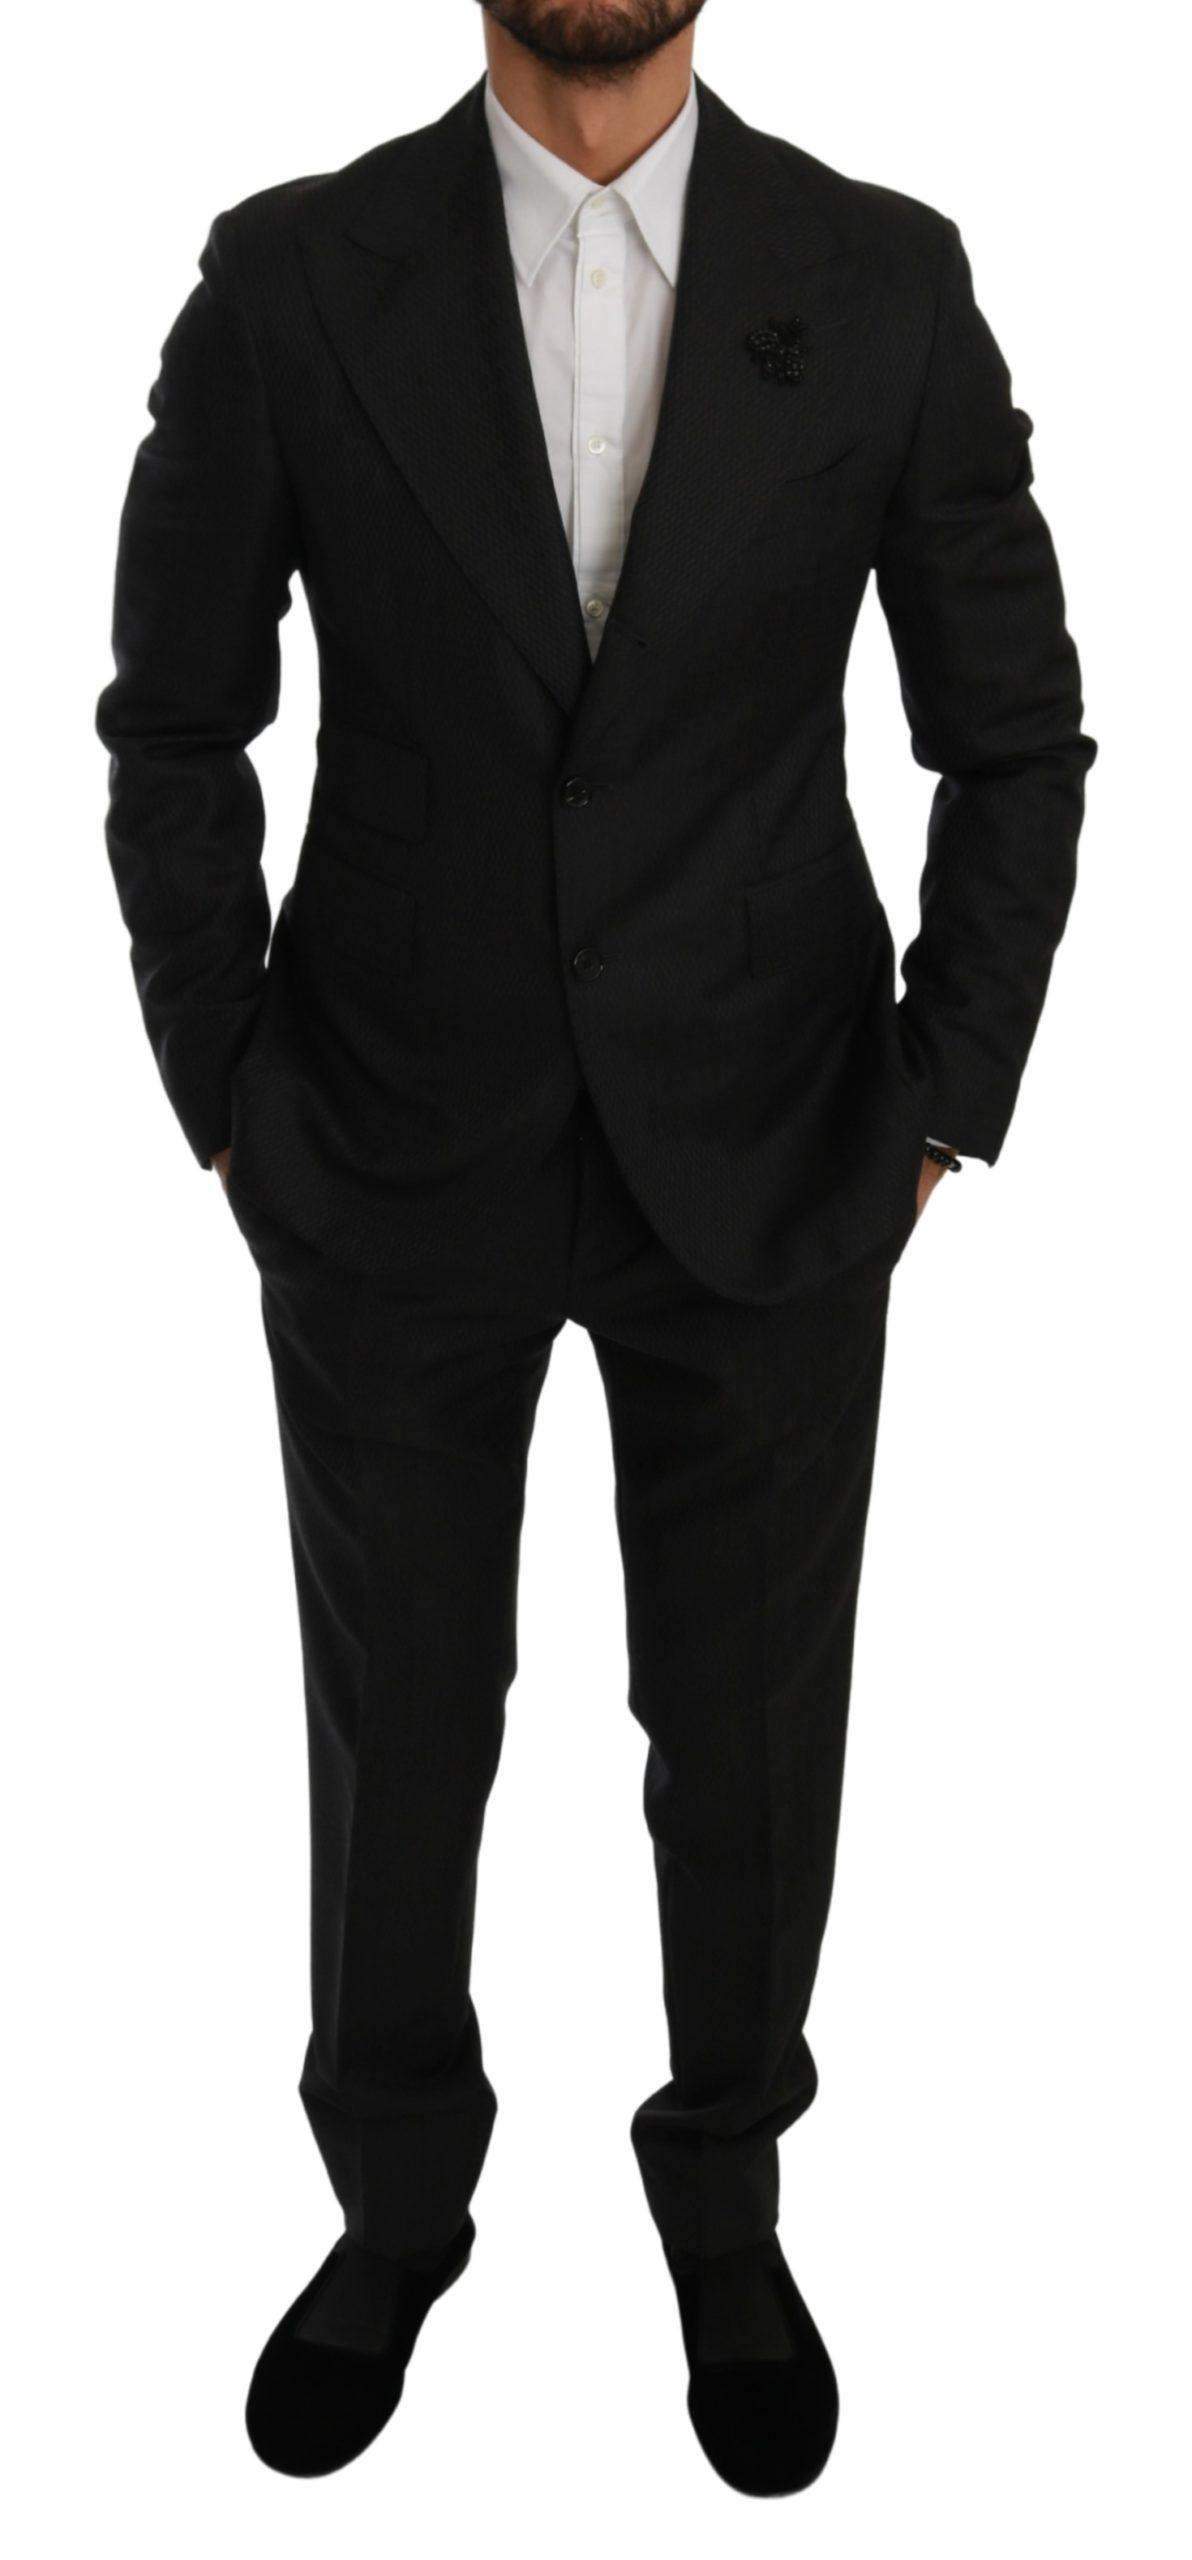 Dolce & Gabbana  Black Crystal Bee Slim Fit 2 Piece Suit #men, Black, Brand_Dolce & Gabbana, Catch, Dolce & Gabbana, feed-agegroup-adult, feed-color-black, feed-gender-male, feed-size-IT44 | XS, feed-size-IT46 | S, Gender_Men, IT44 | XS, IT46 | S, IT48 | M, IT50 | L, Kogan, Men - New Arrivals, Suits - Men - Clothing at SEYMAYKA